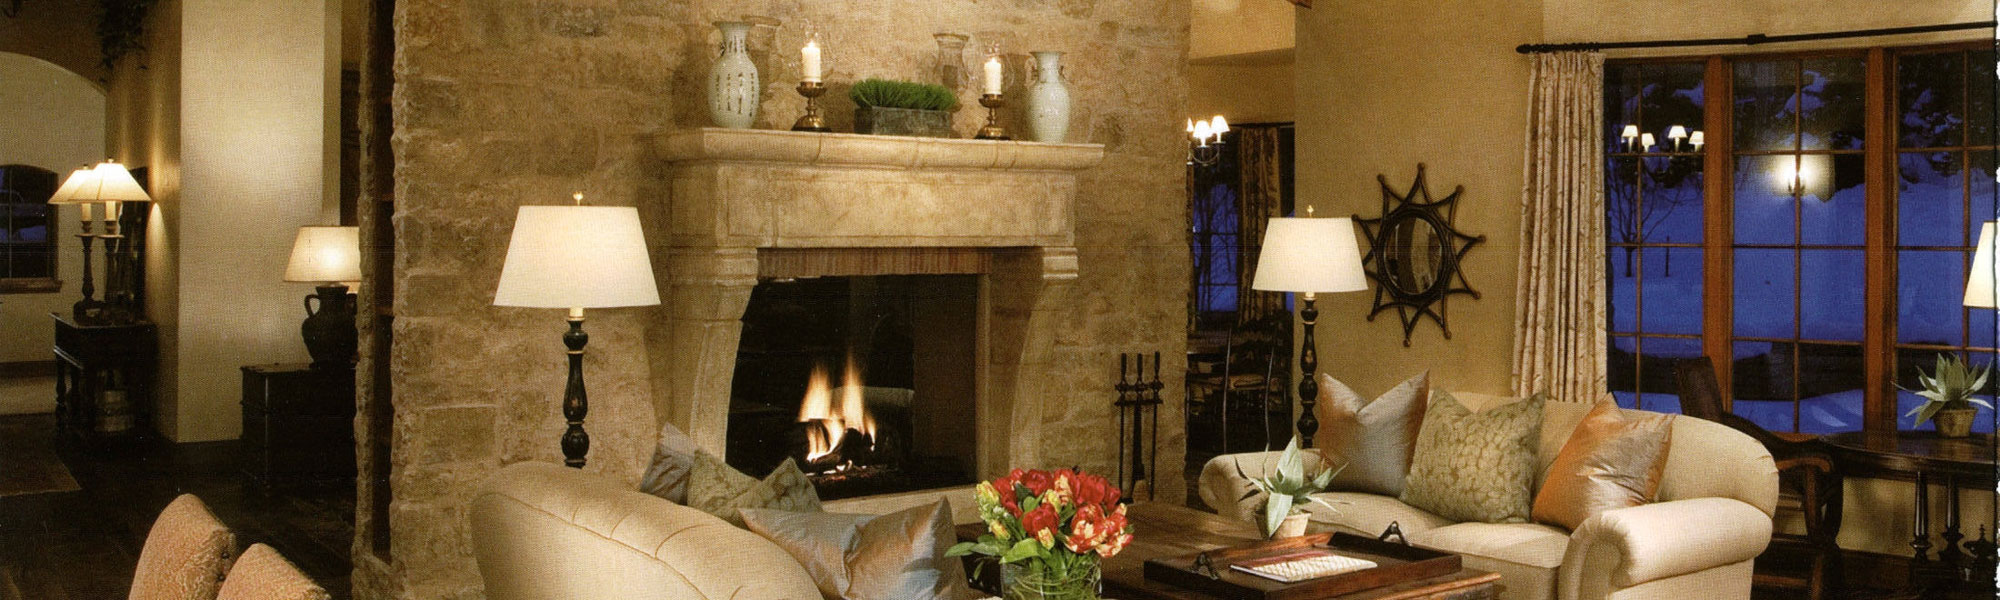 Living Room with a Large Fireplace